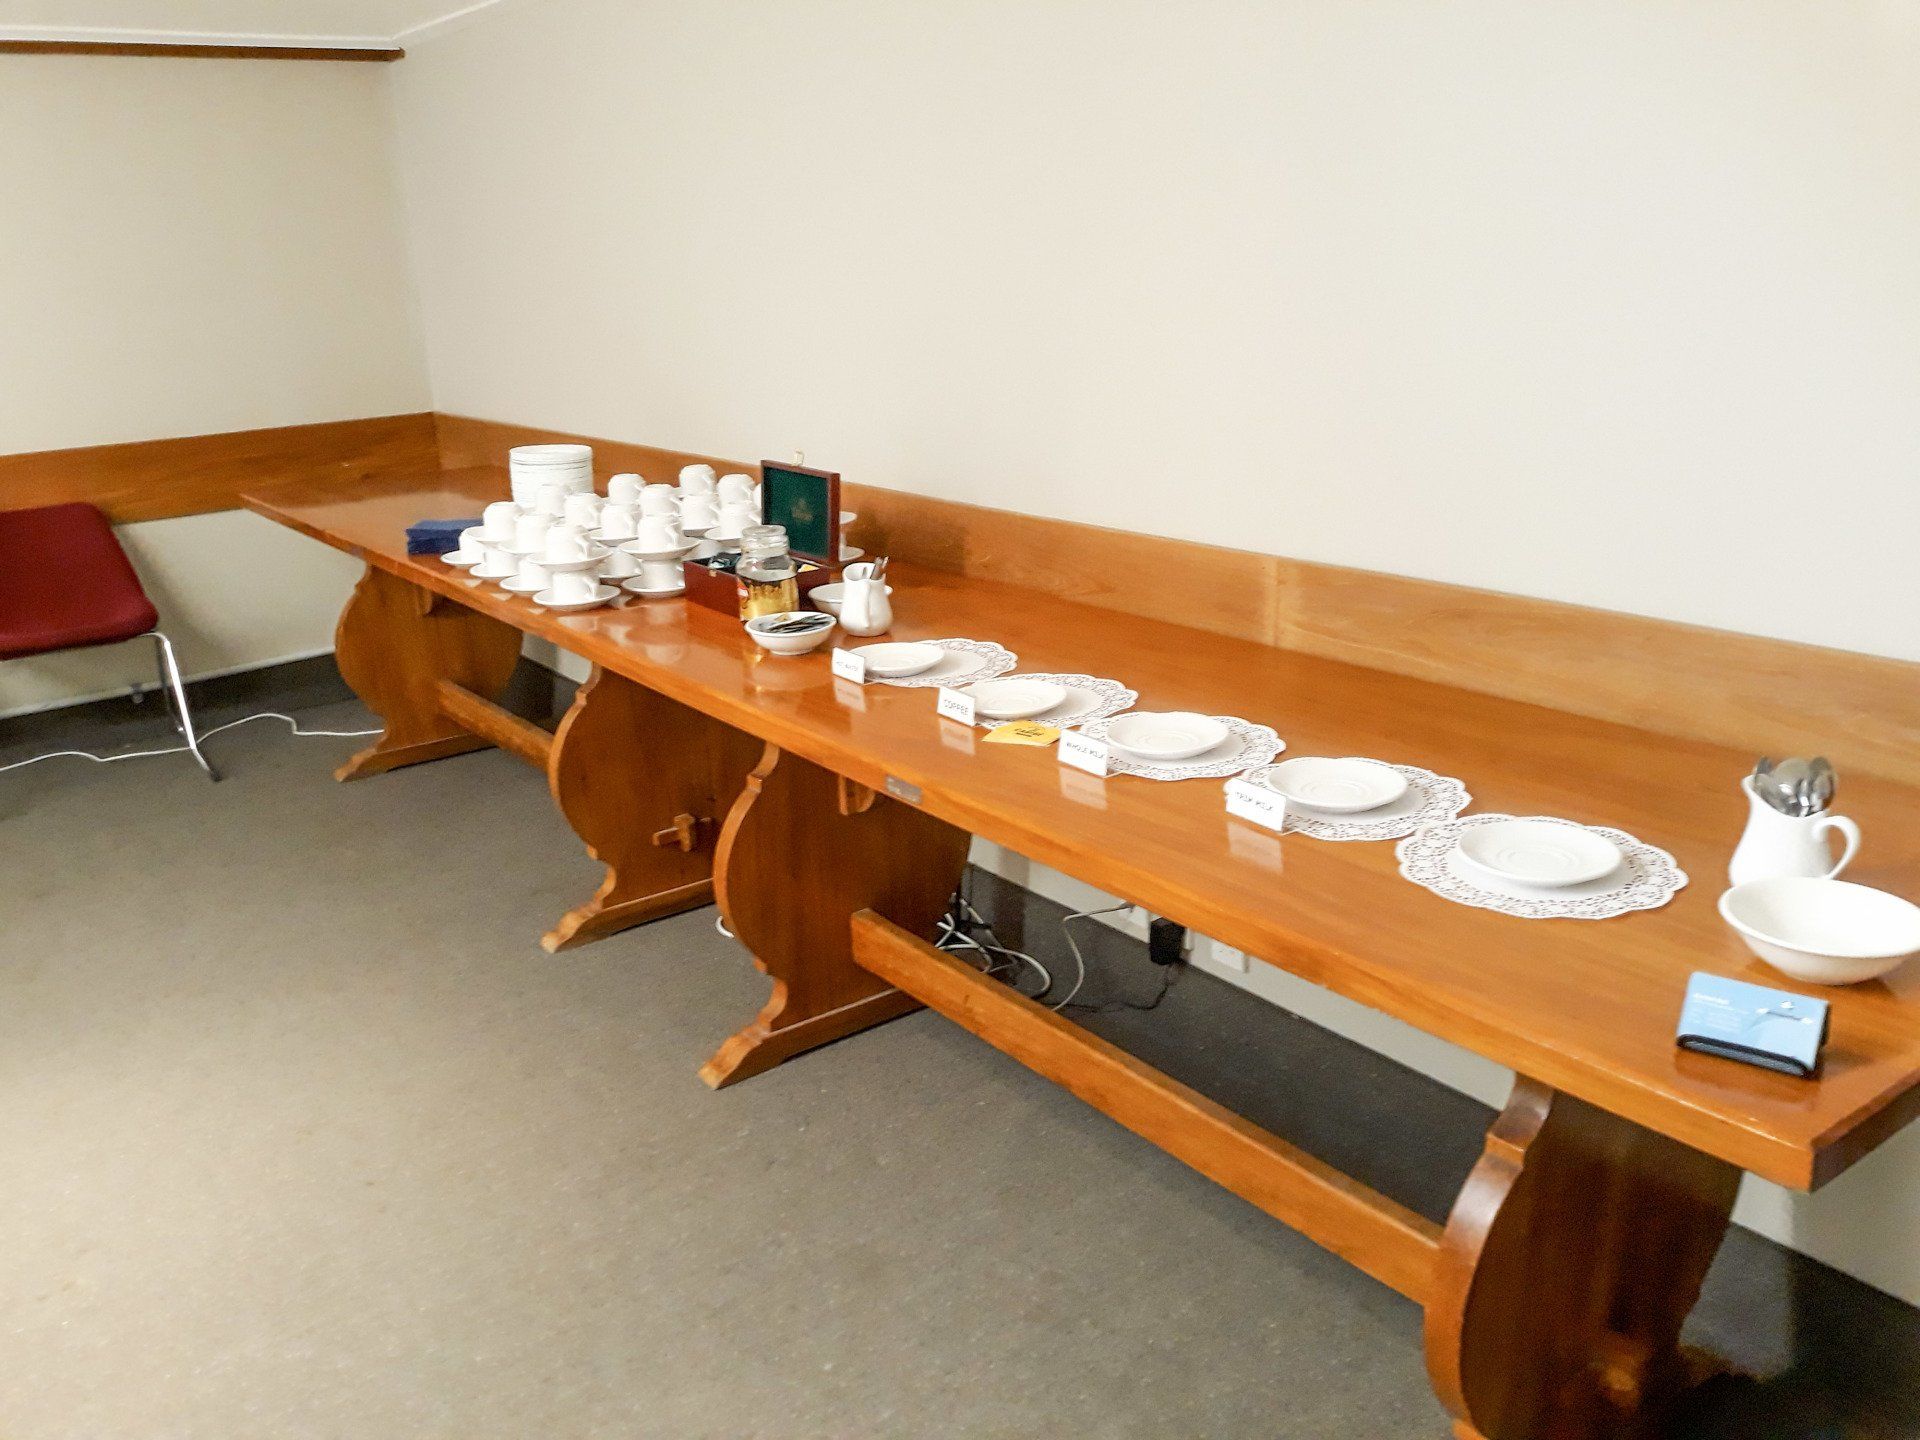 Large meeting room hire - Wellington - All Accounted For - catering, projector, wifi